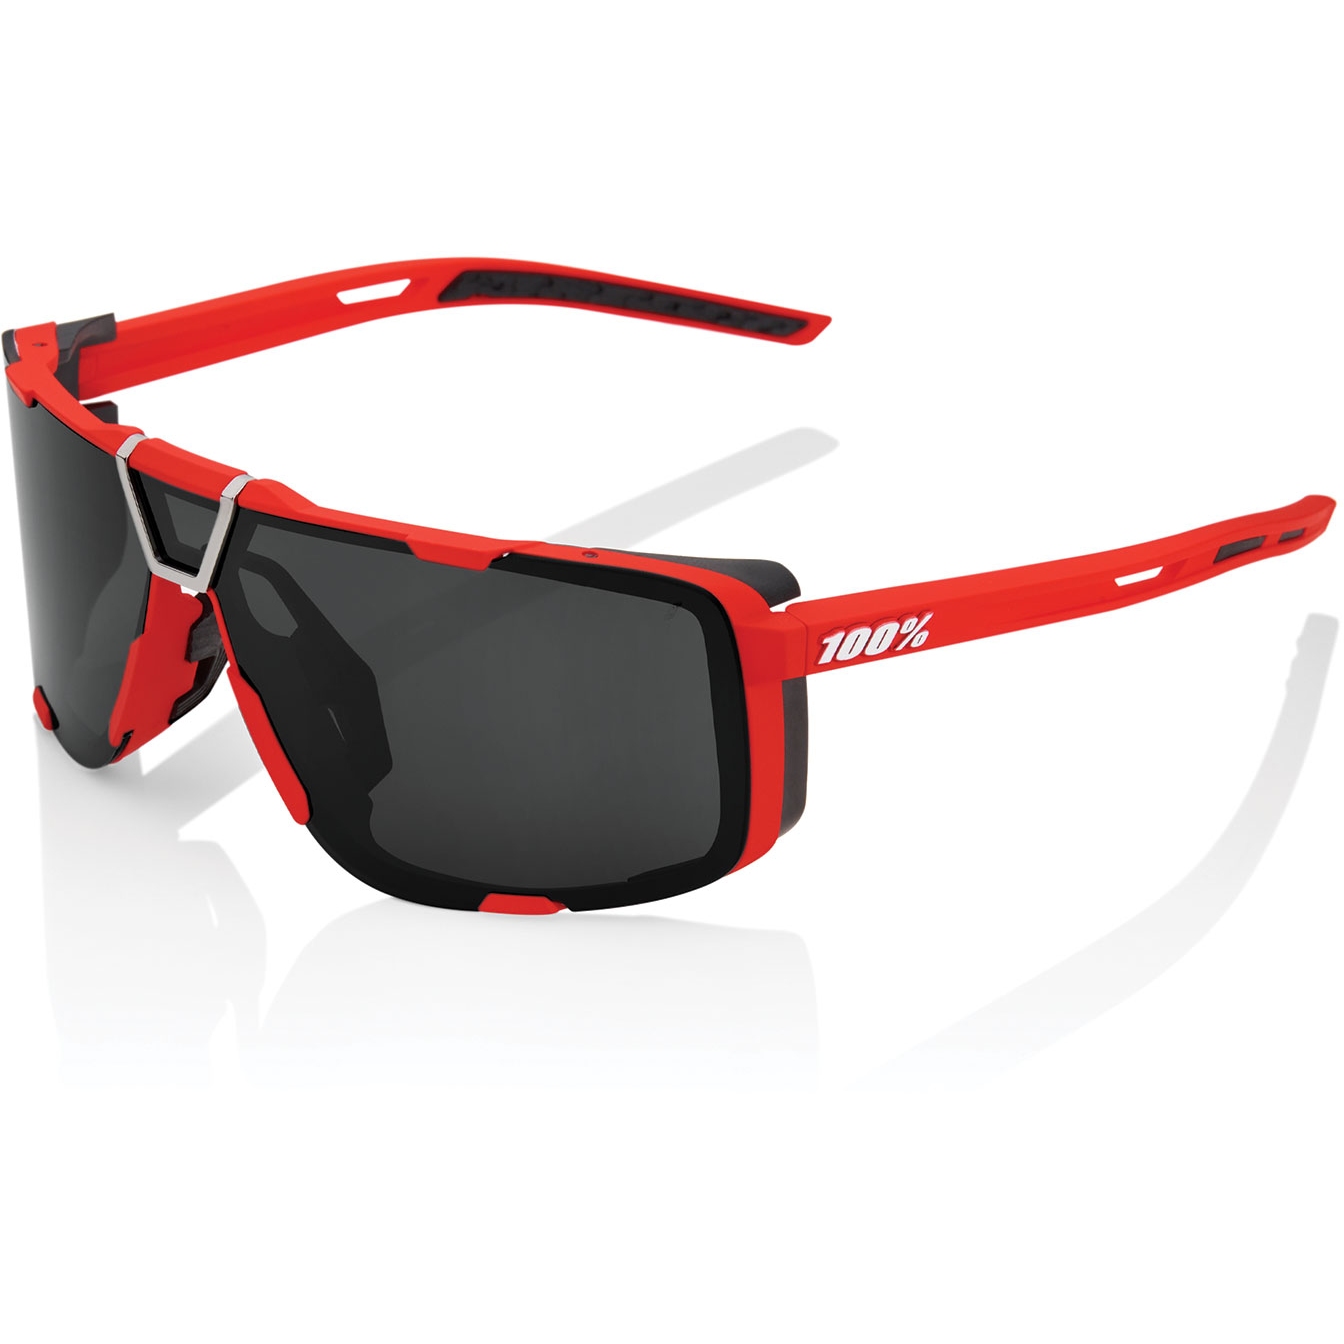 Productfoto van 100% Eastcraft Glasses - Mirror Lens - Soft Tact Red / Black